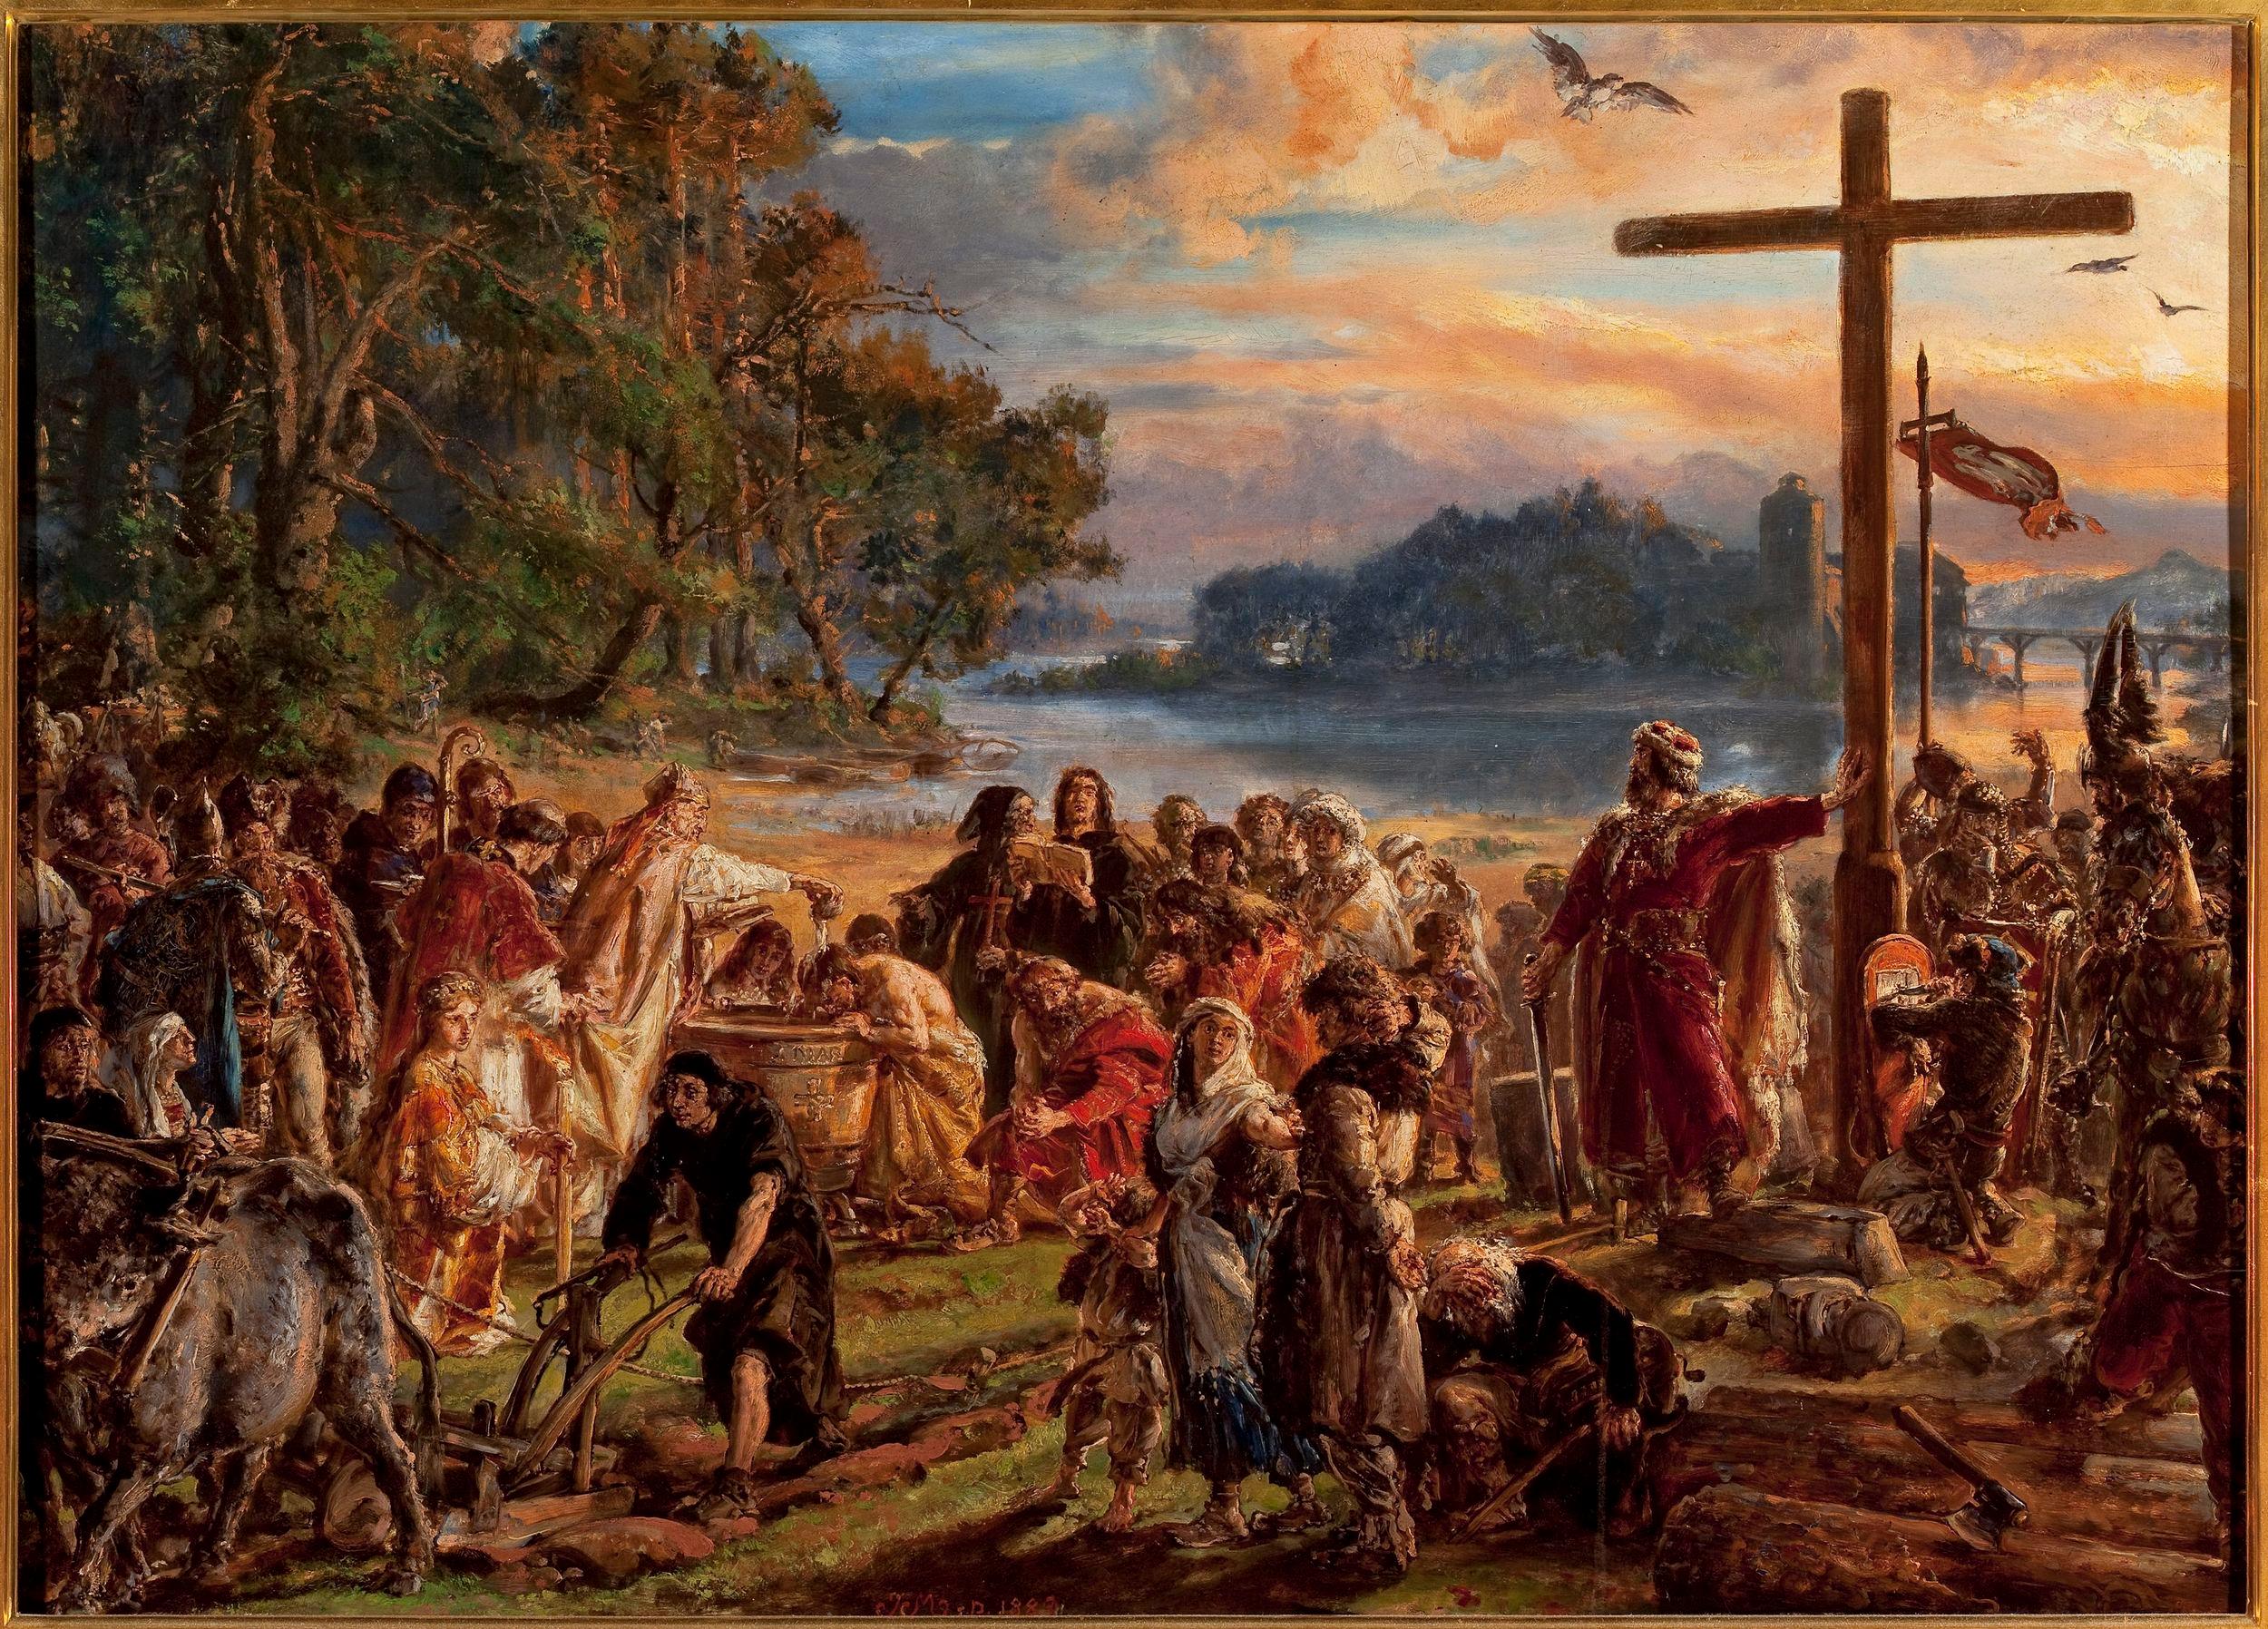 Polish, Jan Matejko, Classical art, The Introduction of Christianity to Poland Wallpaper